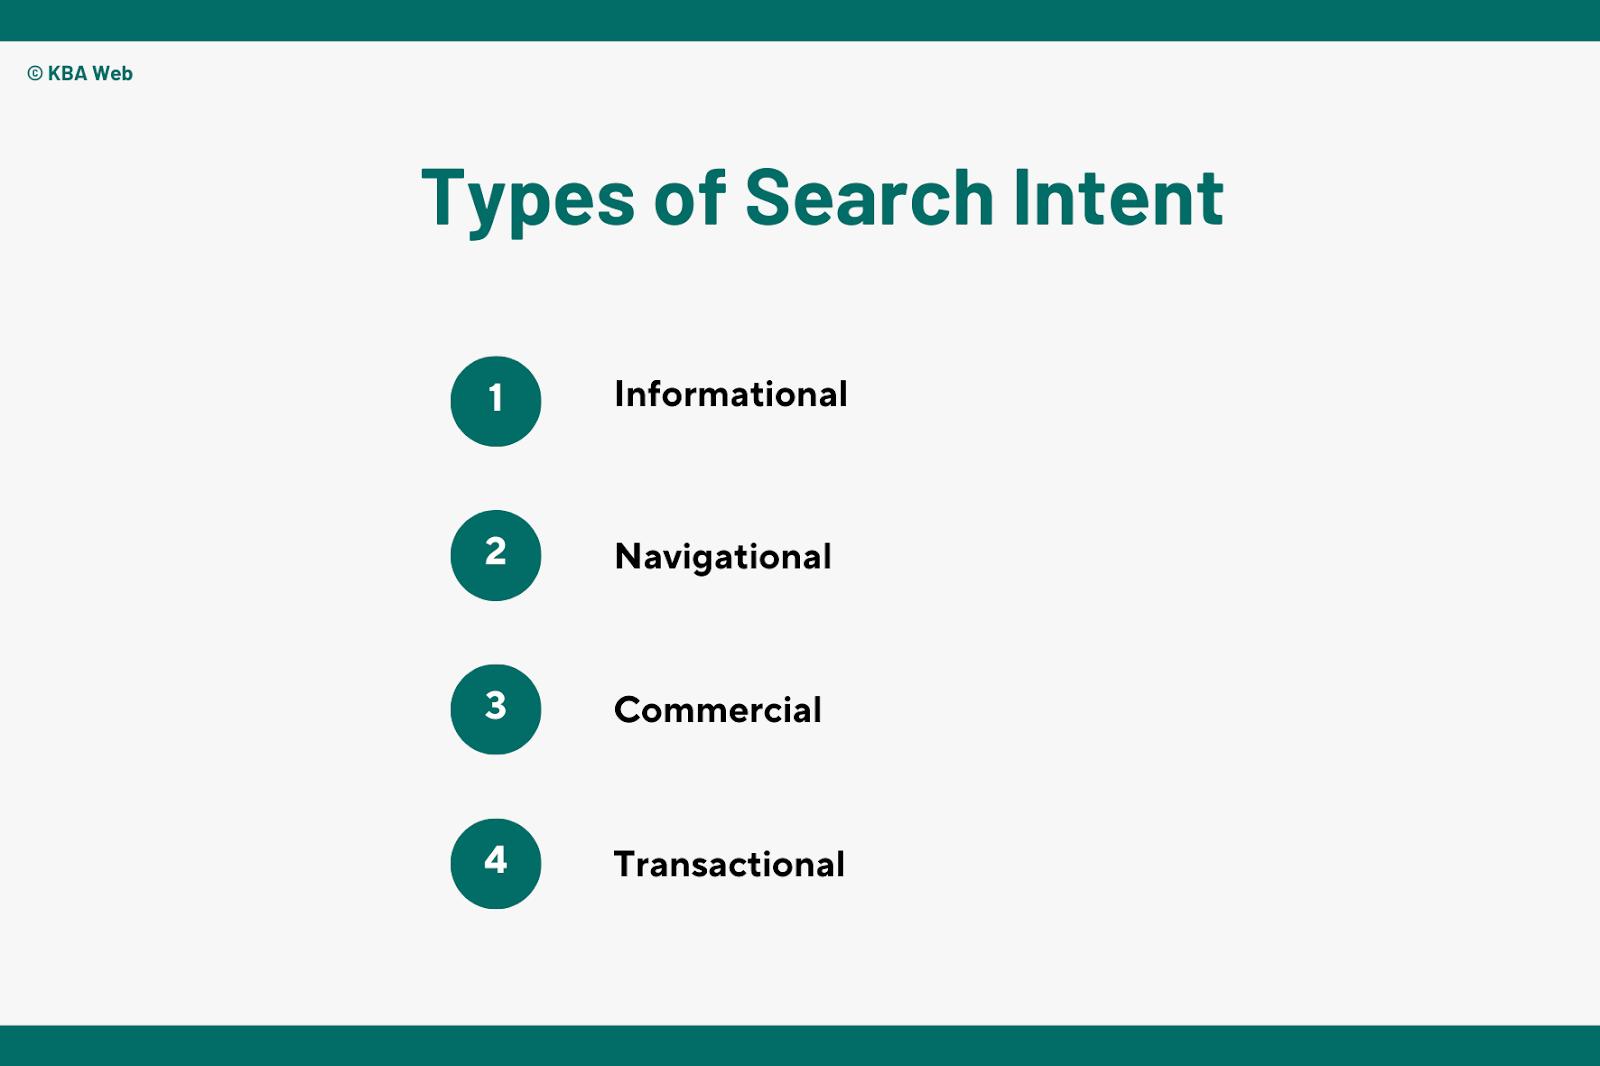 types of search intent: informational, navigational, commercial, transactional